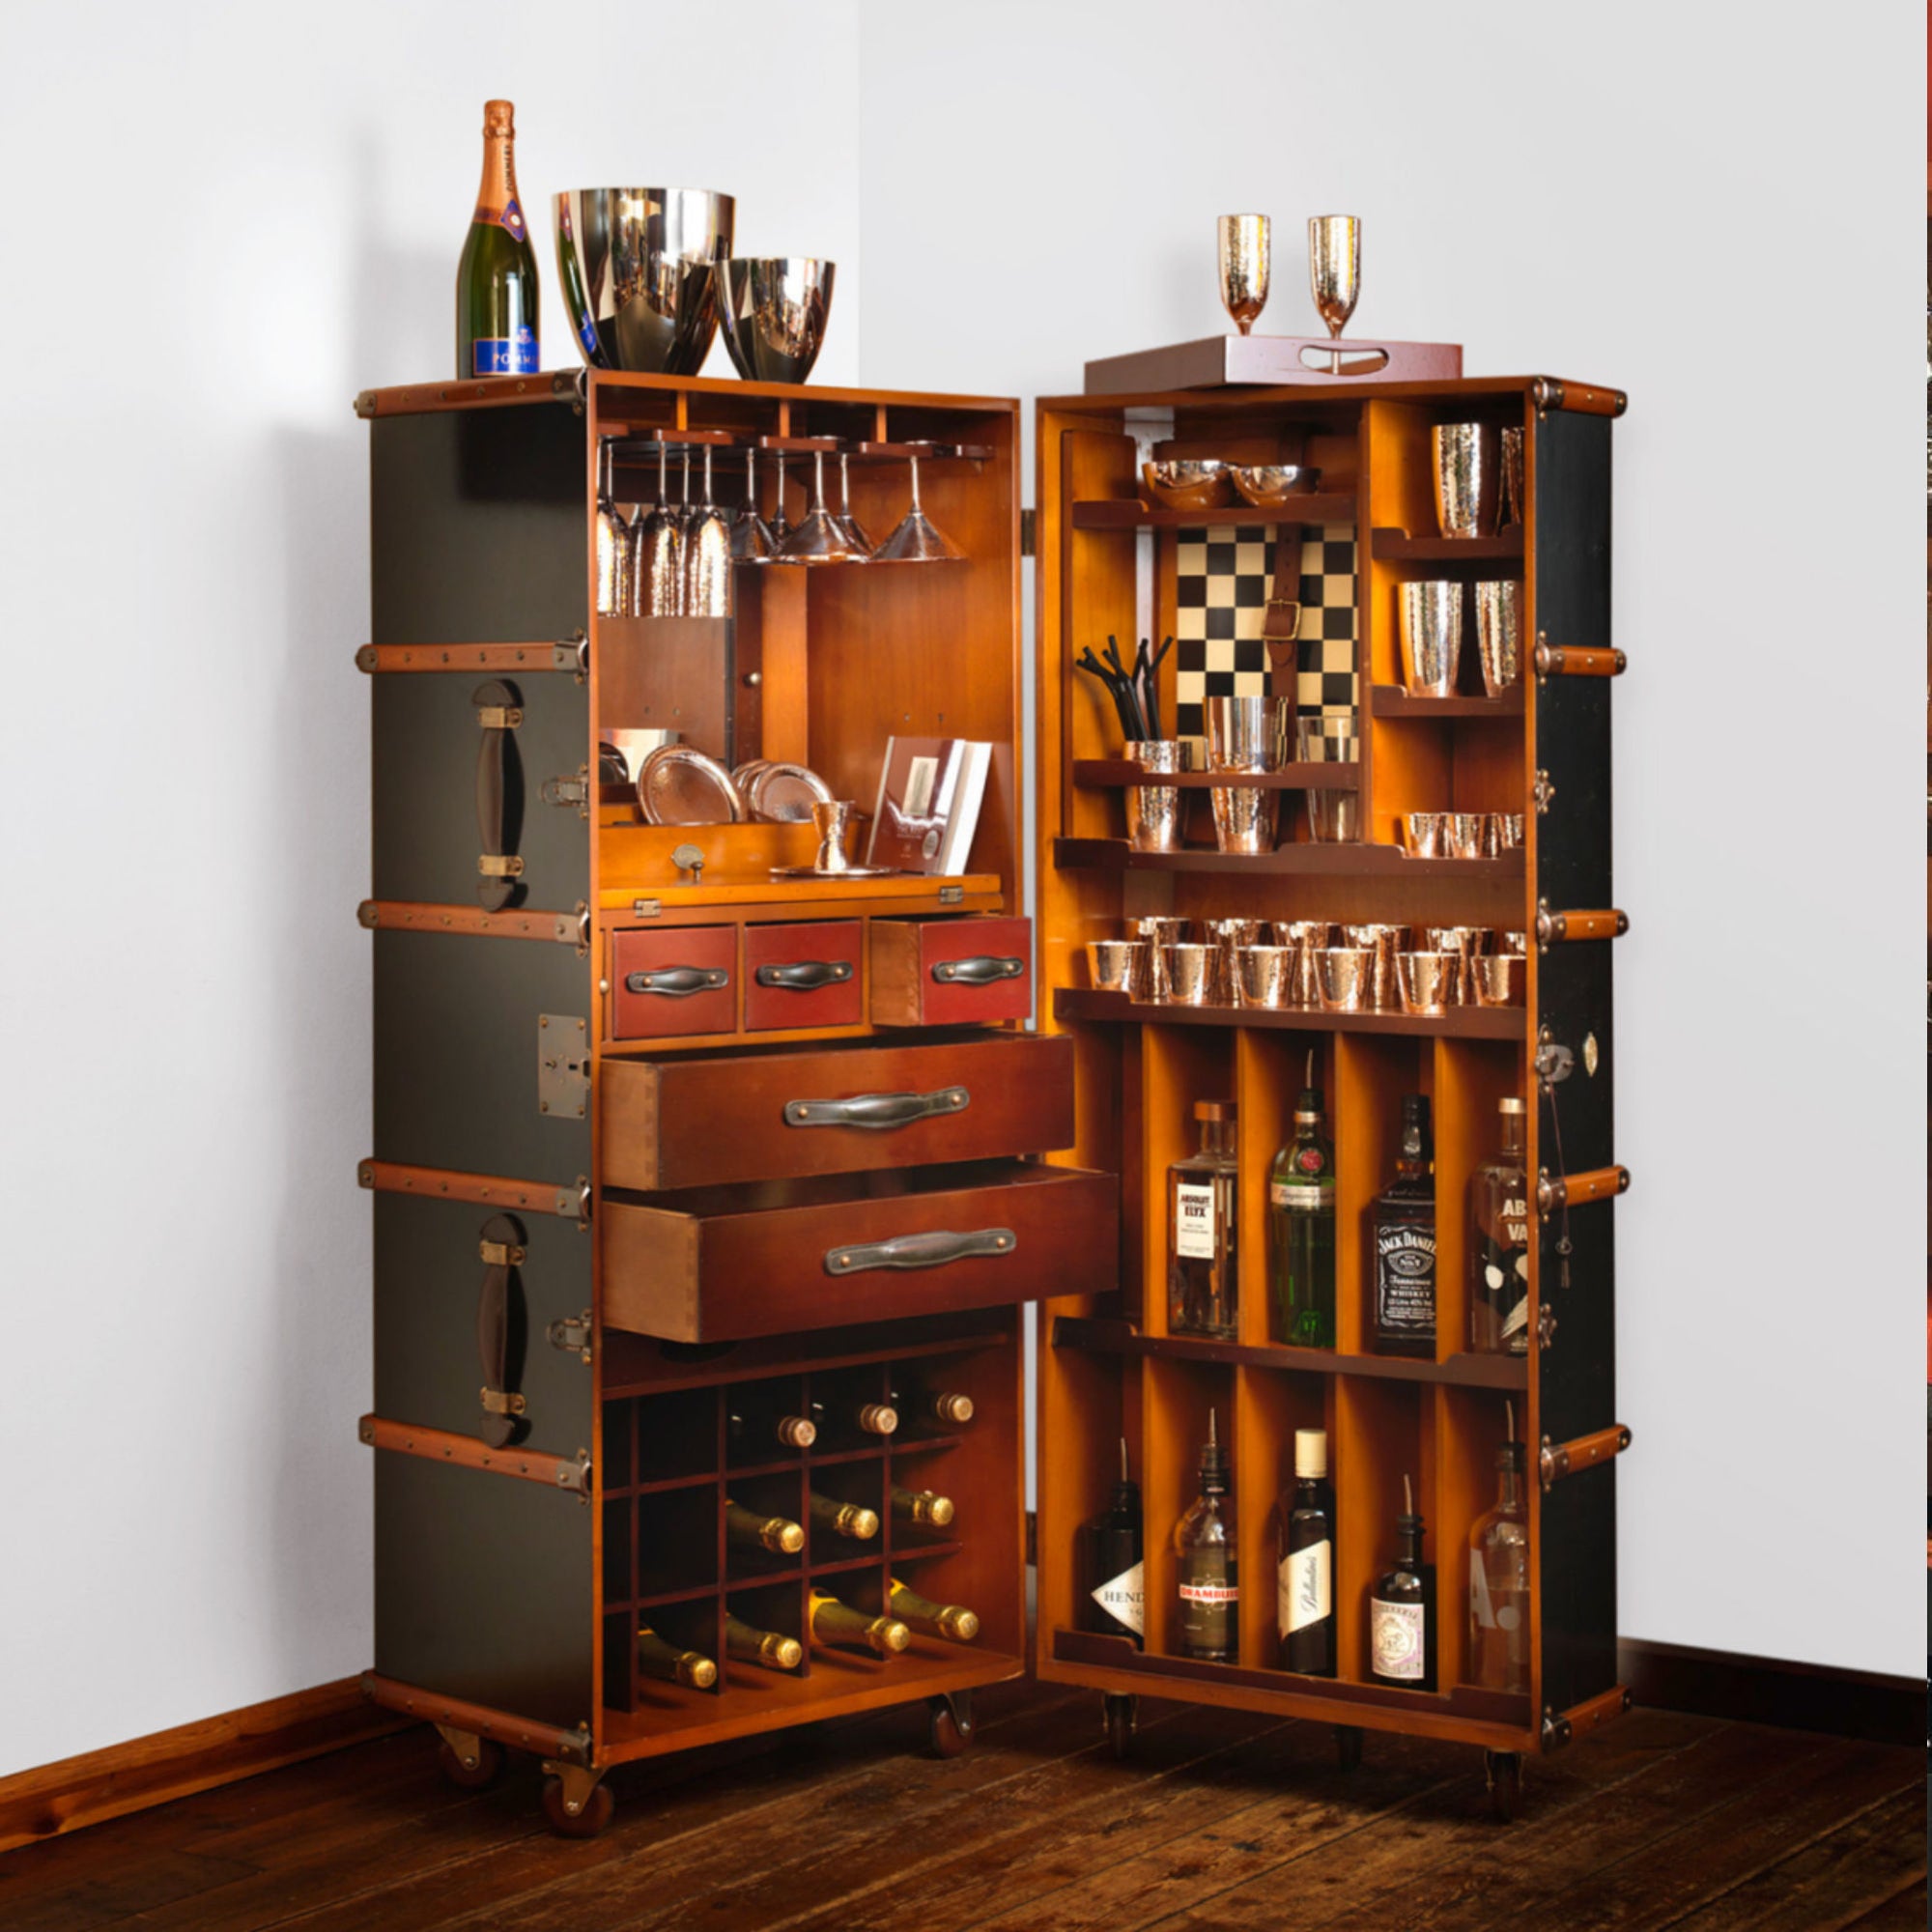 Black Steamer Trunk with Bar Cabinet